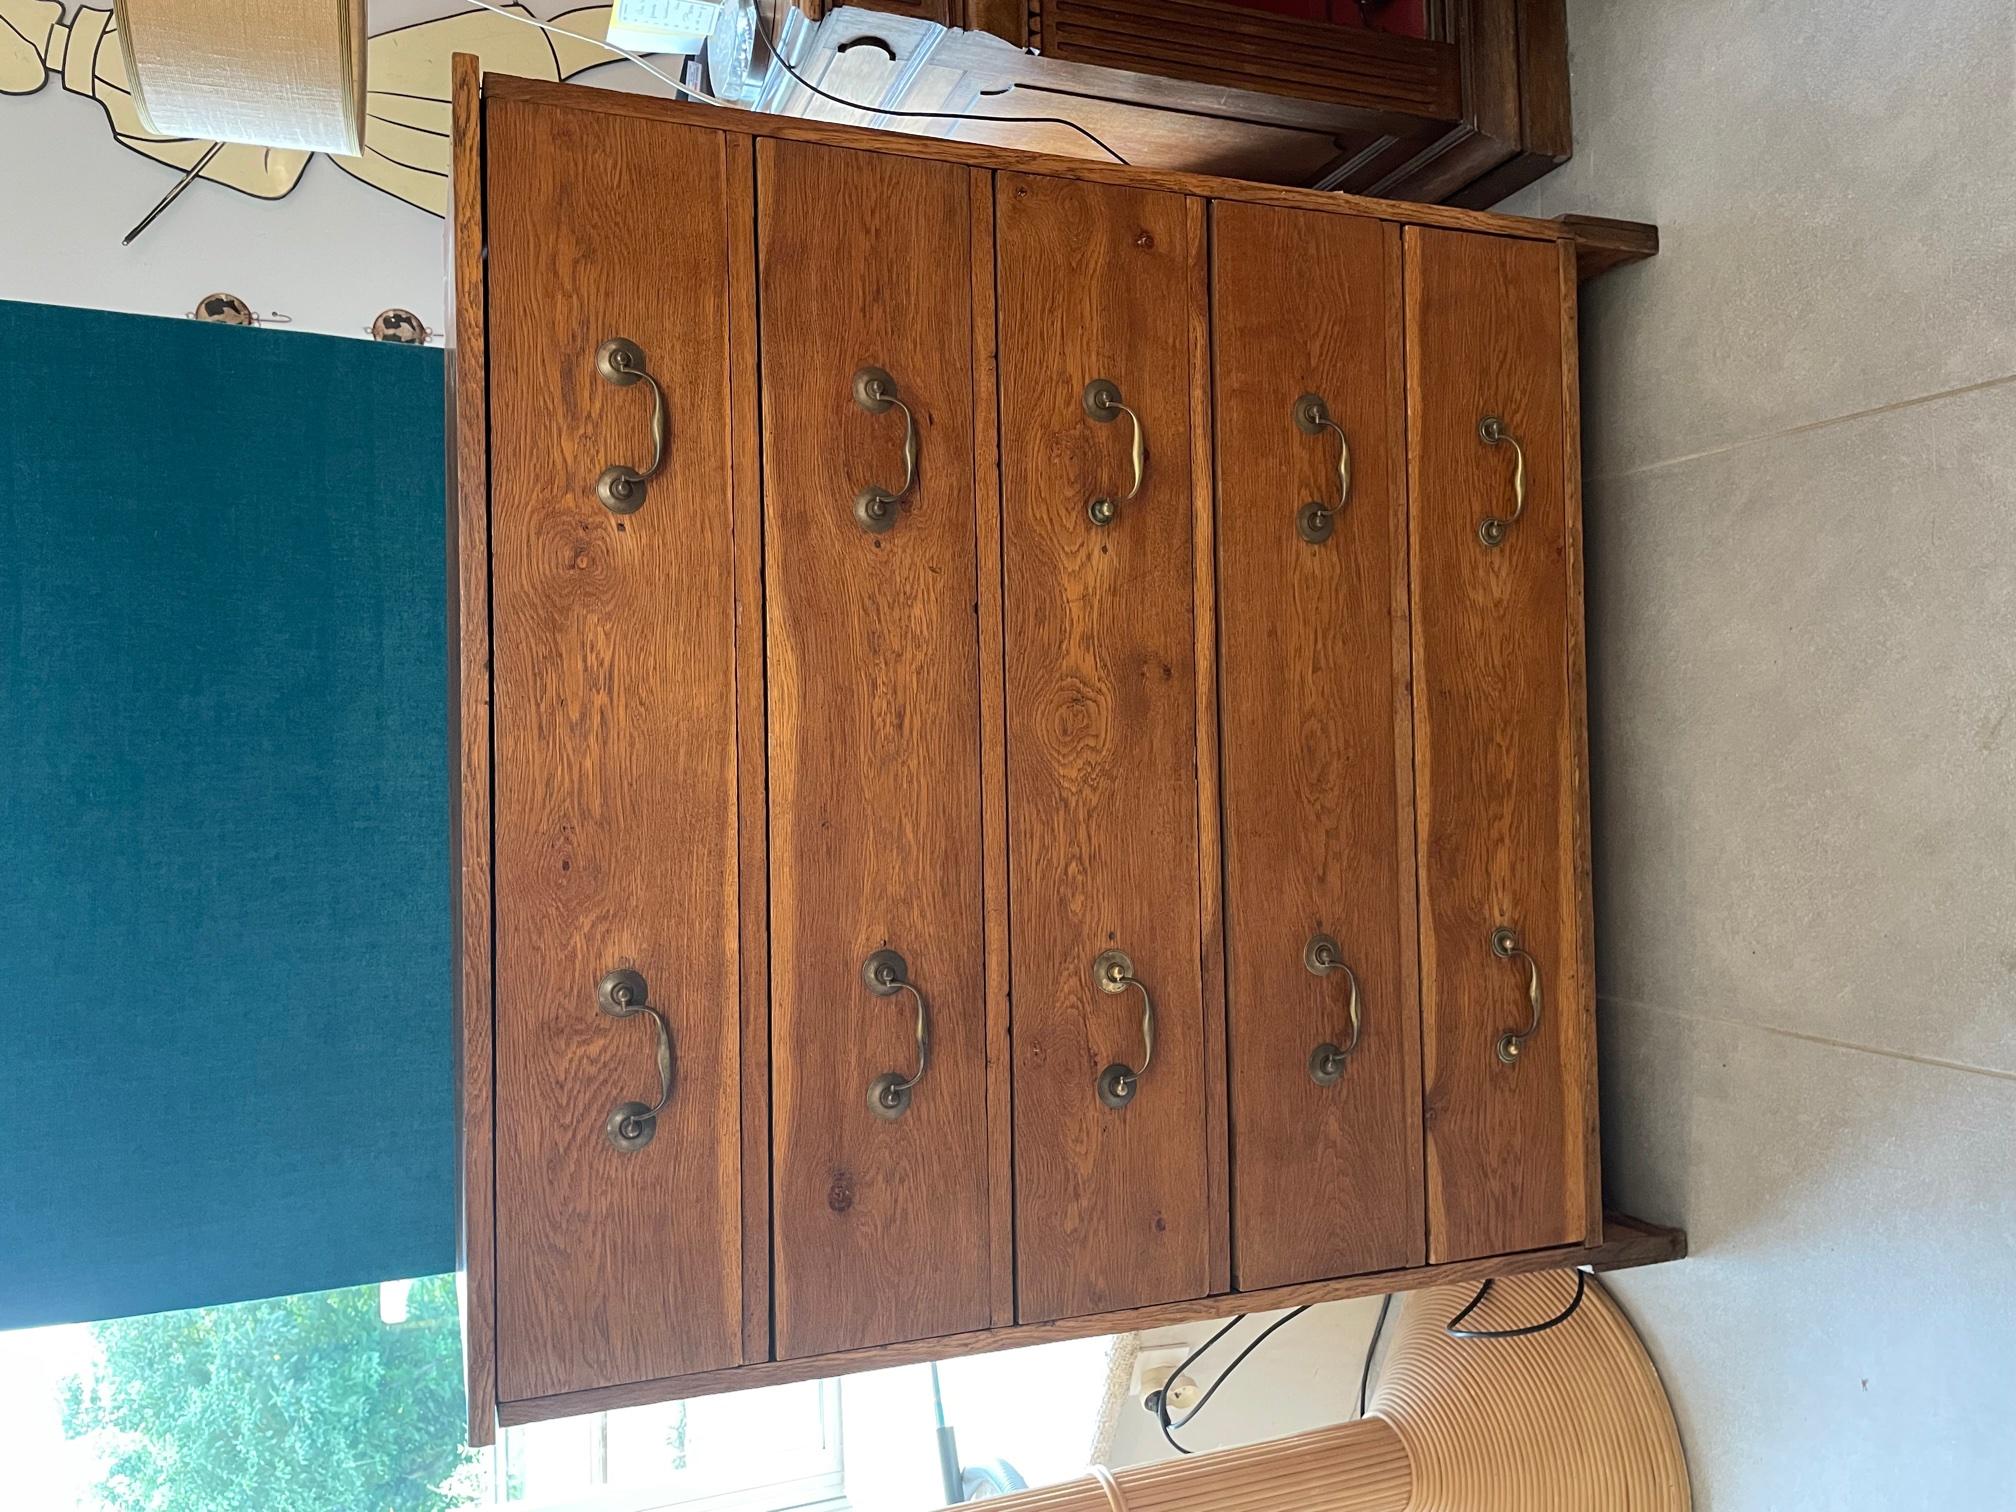 Very nice and rare 20th century French oak. 
Five drawers with brass handles. 
Nice quality and condition.